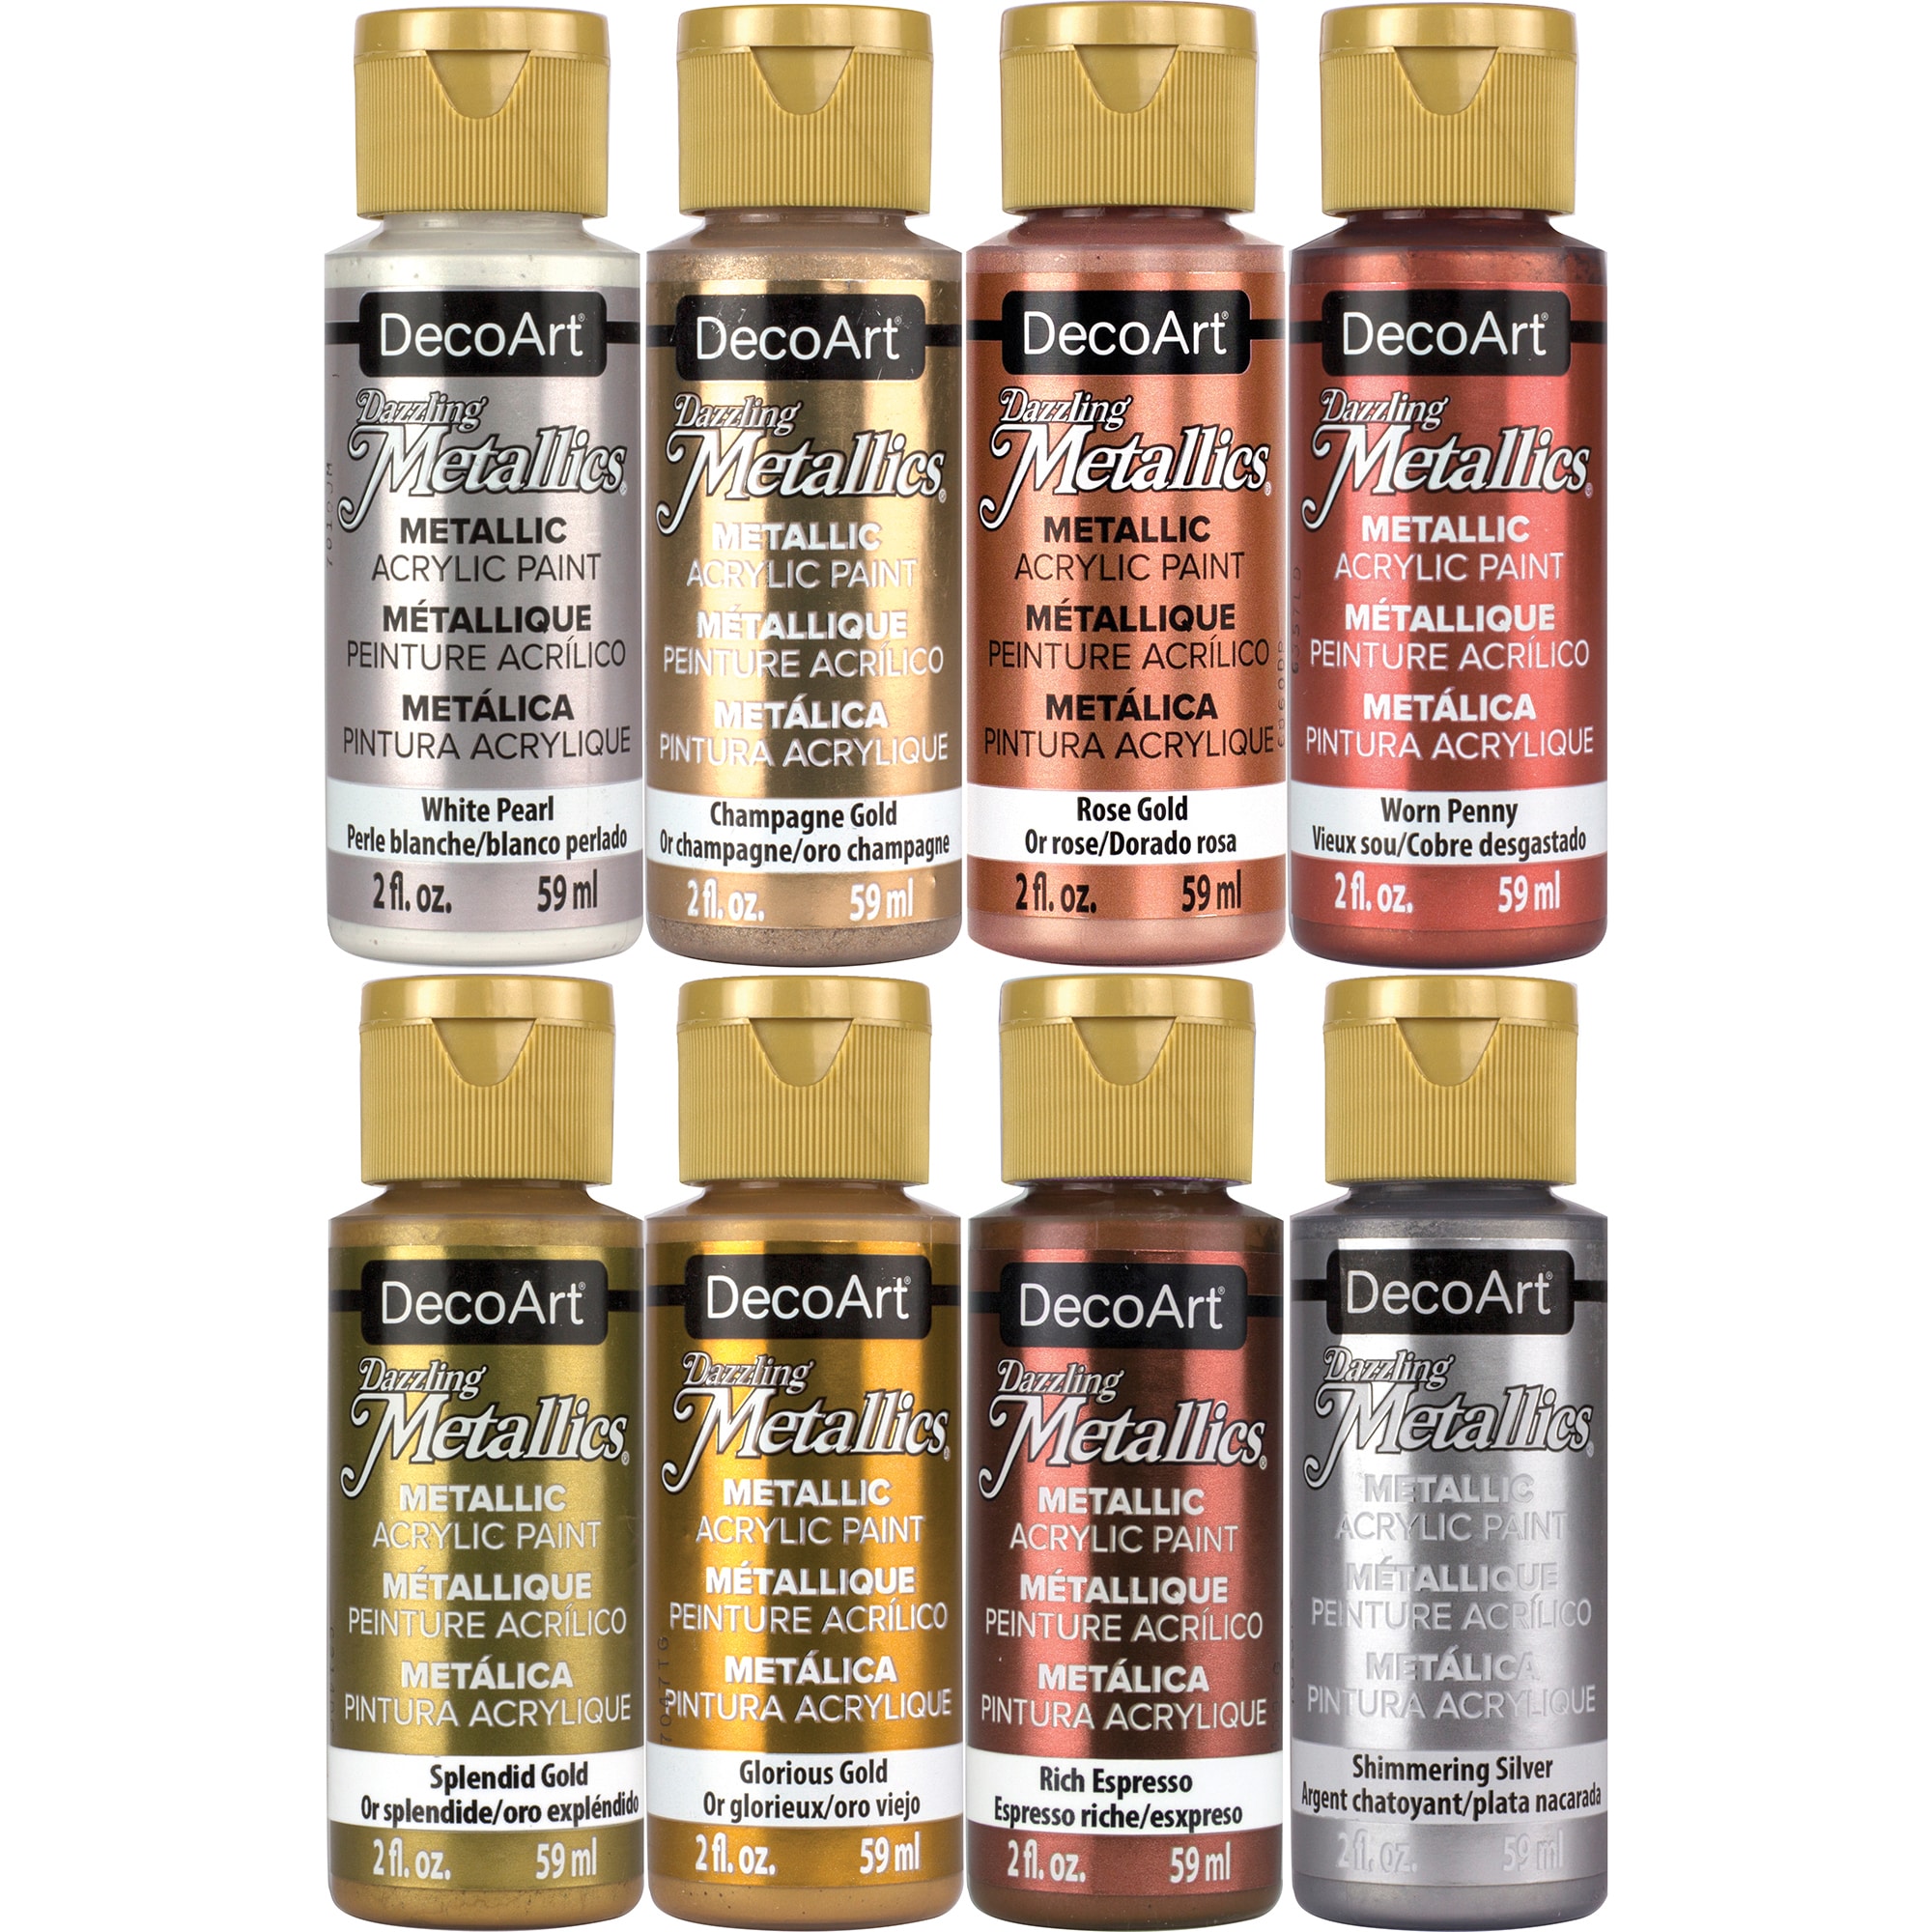 12 Pack: Neon Outdoor Acrylic Paint by Craft Smart®, 2oz